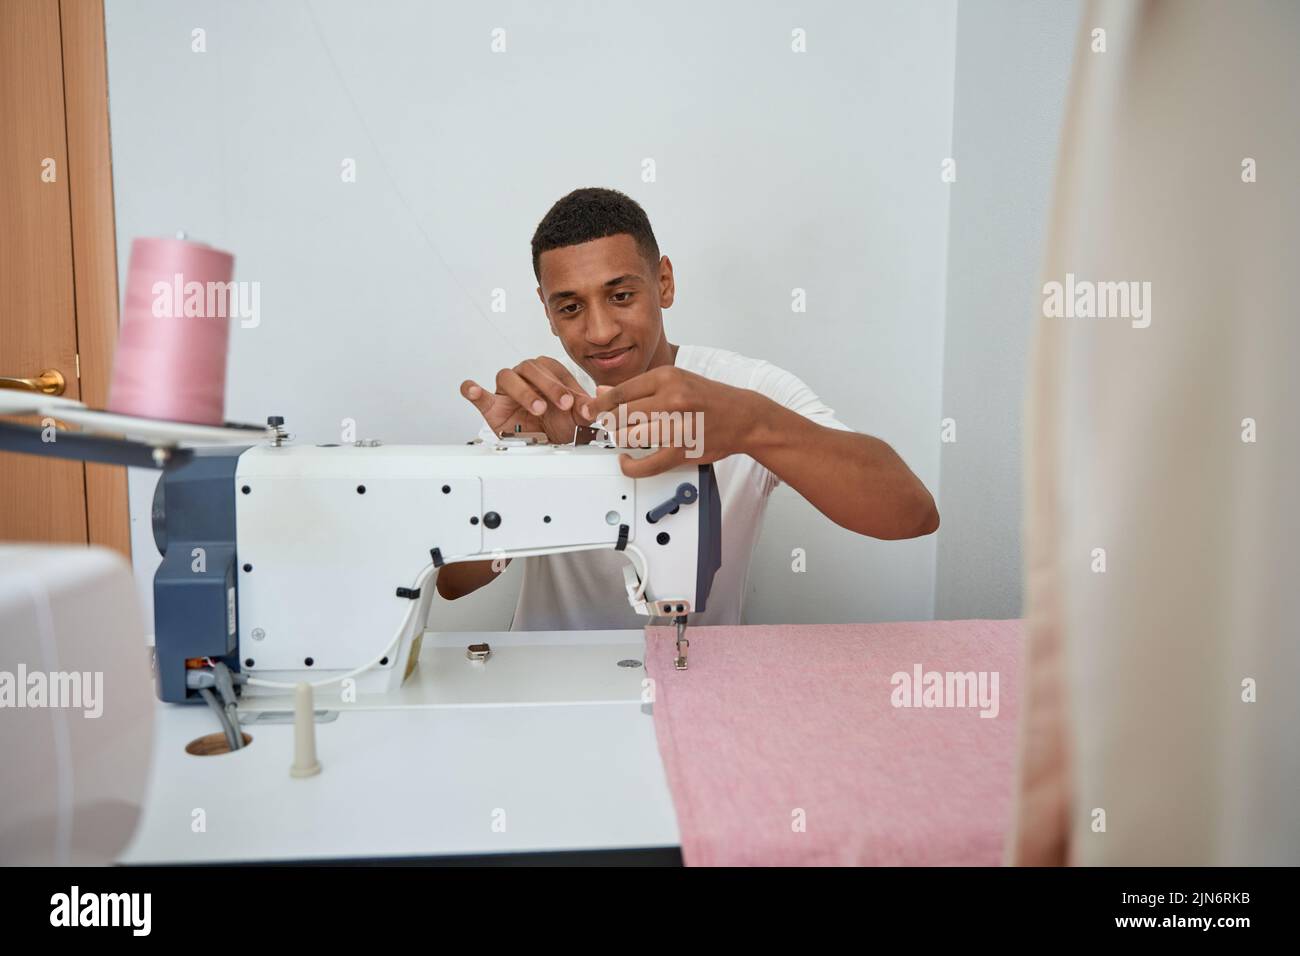 Smiling young tailor enjoying work in atelier with equipment Stock Photo